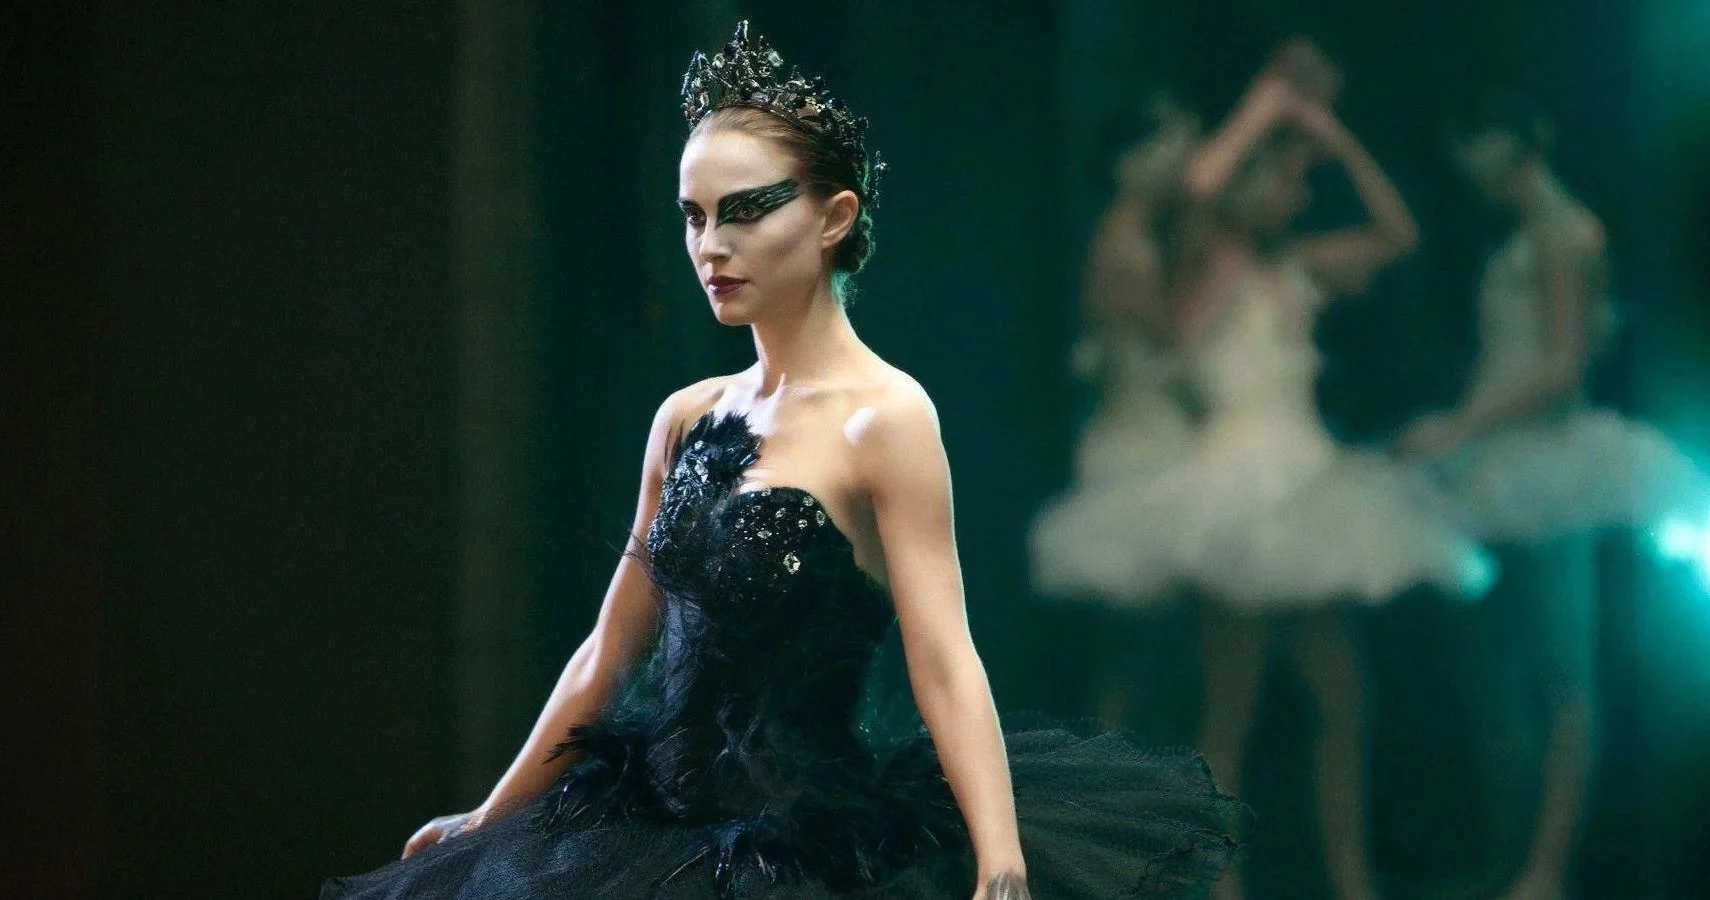 The Love Story That Started With "Black Swan"